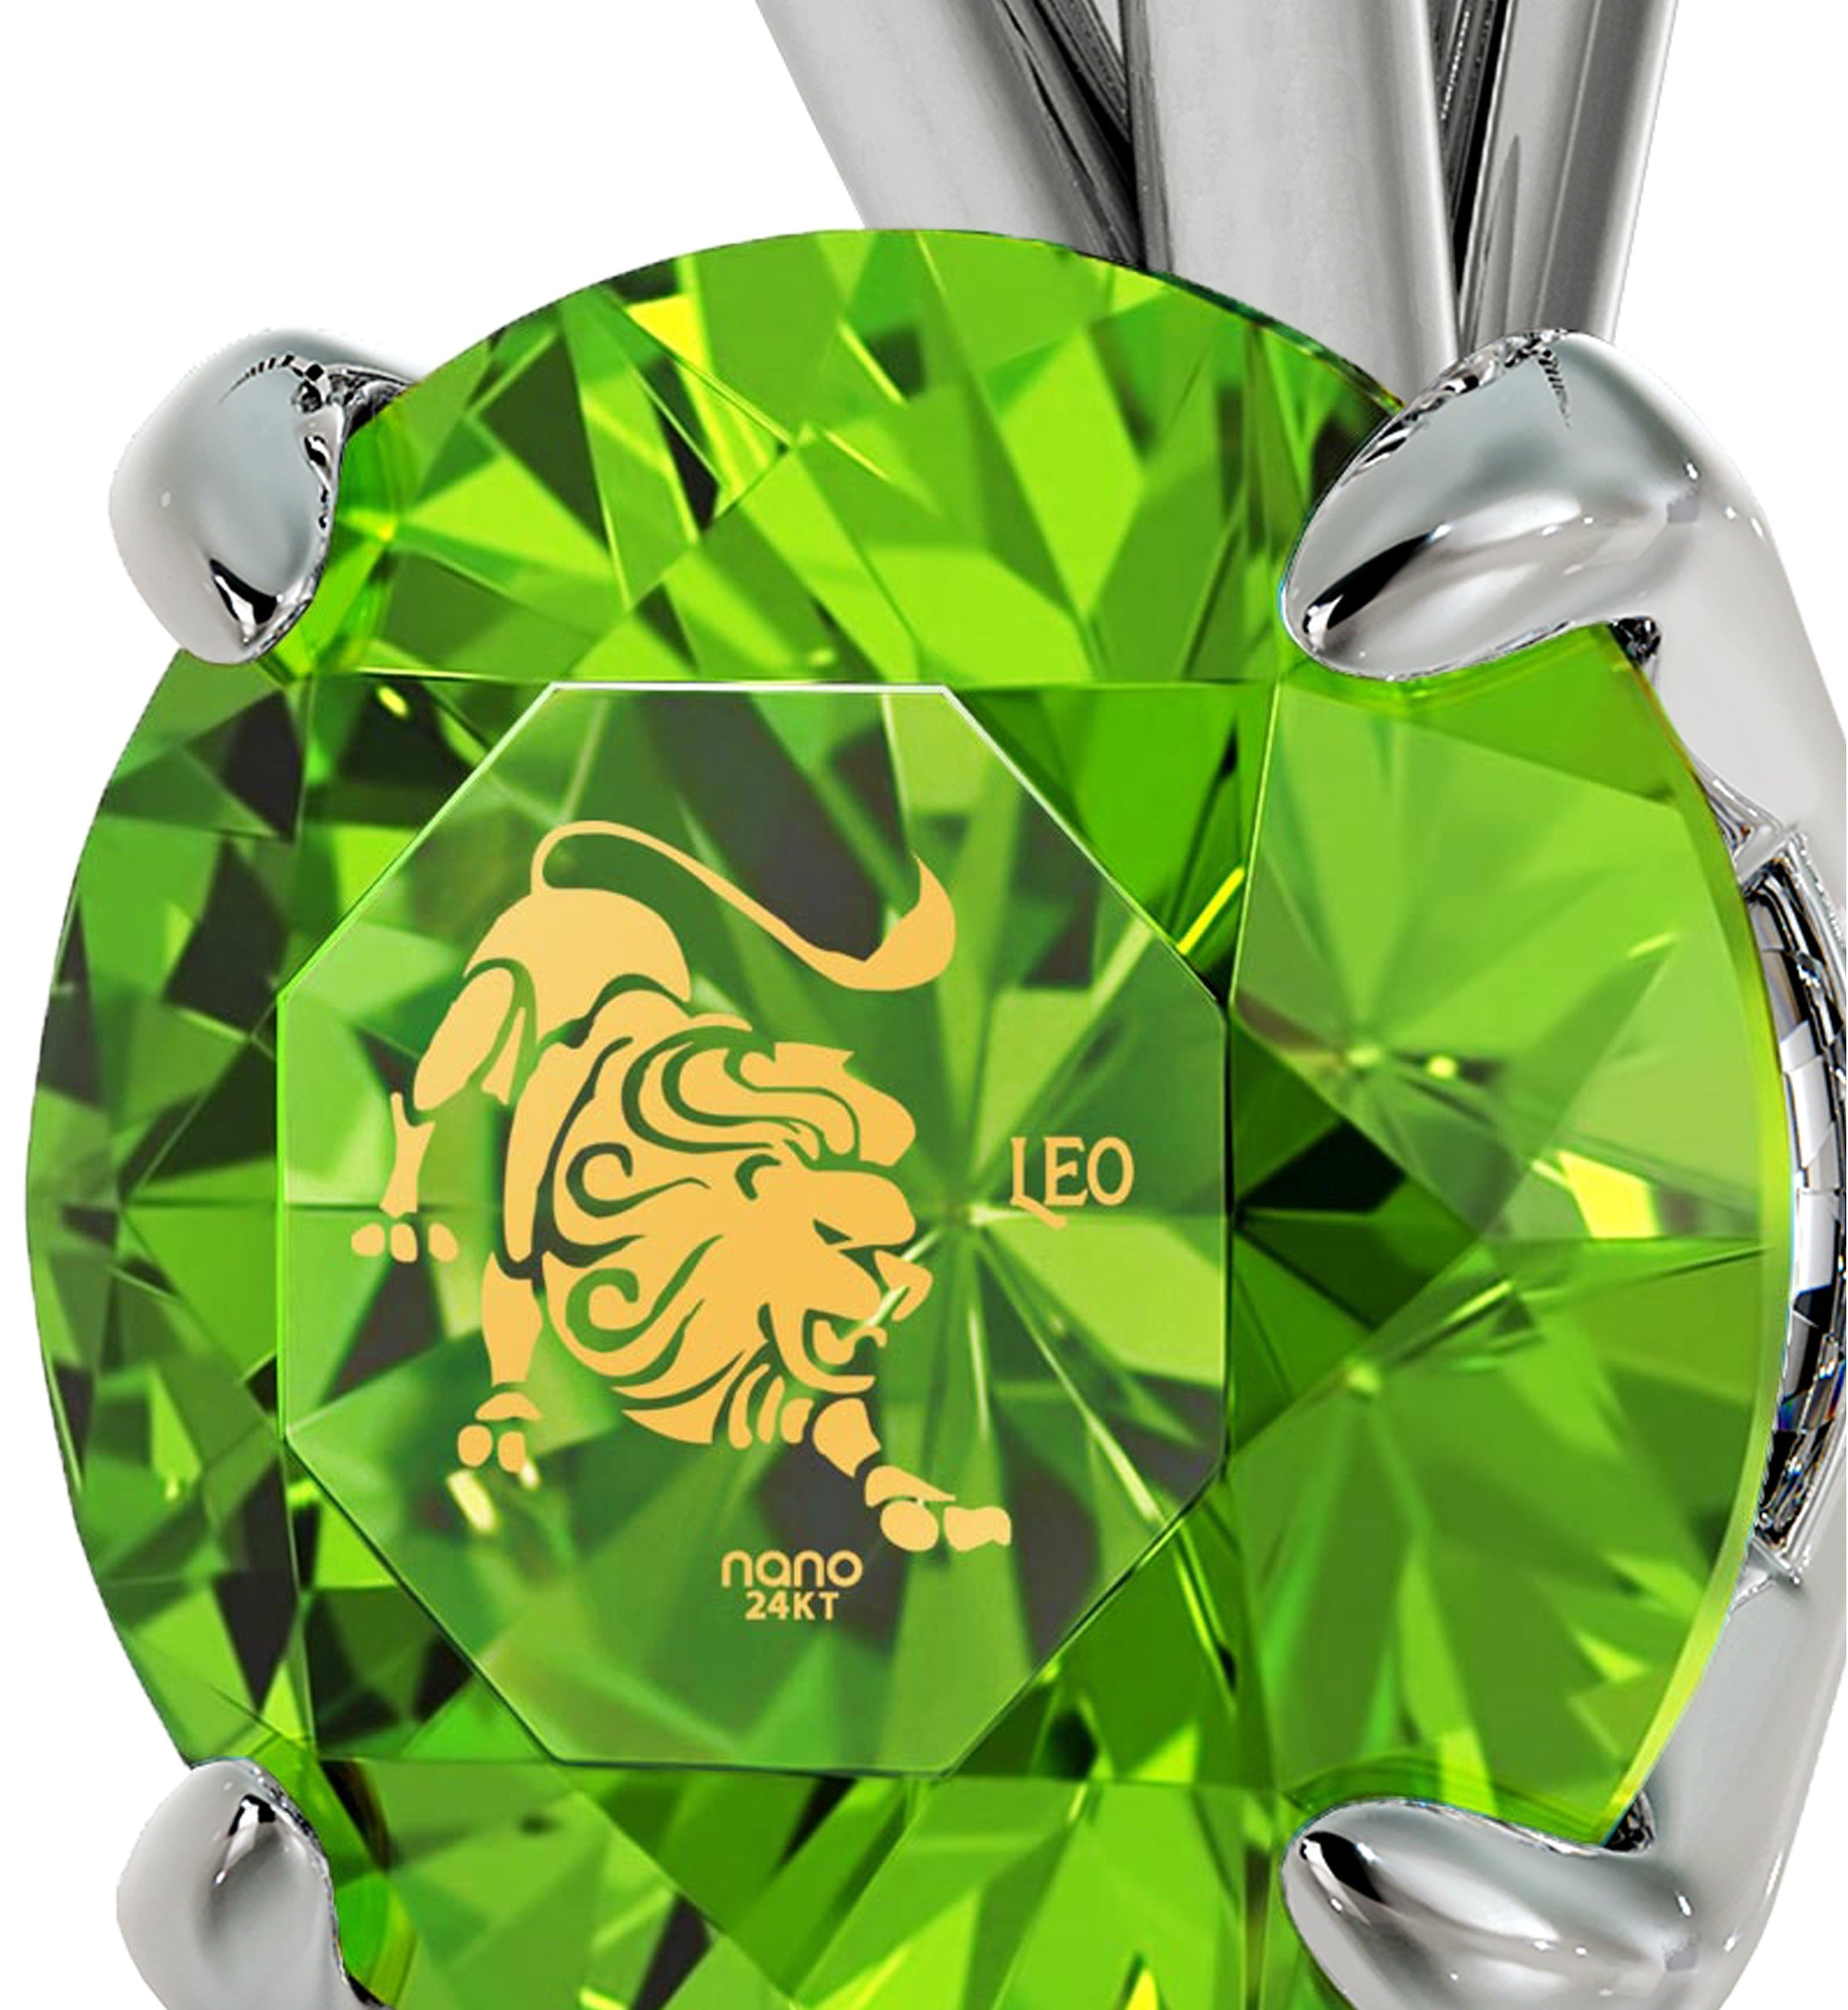 925 Sterling Silver Leo Necklace Zodiac Pendant with Green Gemstone, accompanied by a small tag with "nano jewelry" inscribed.